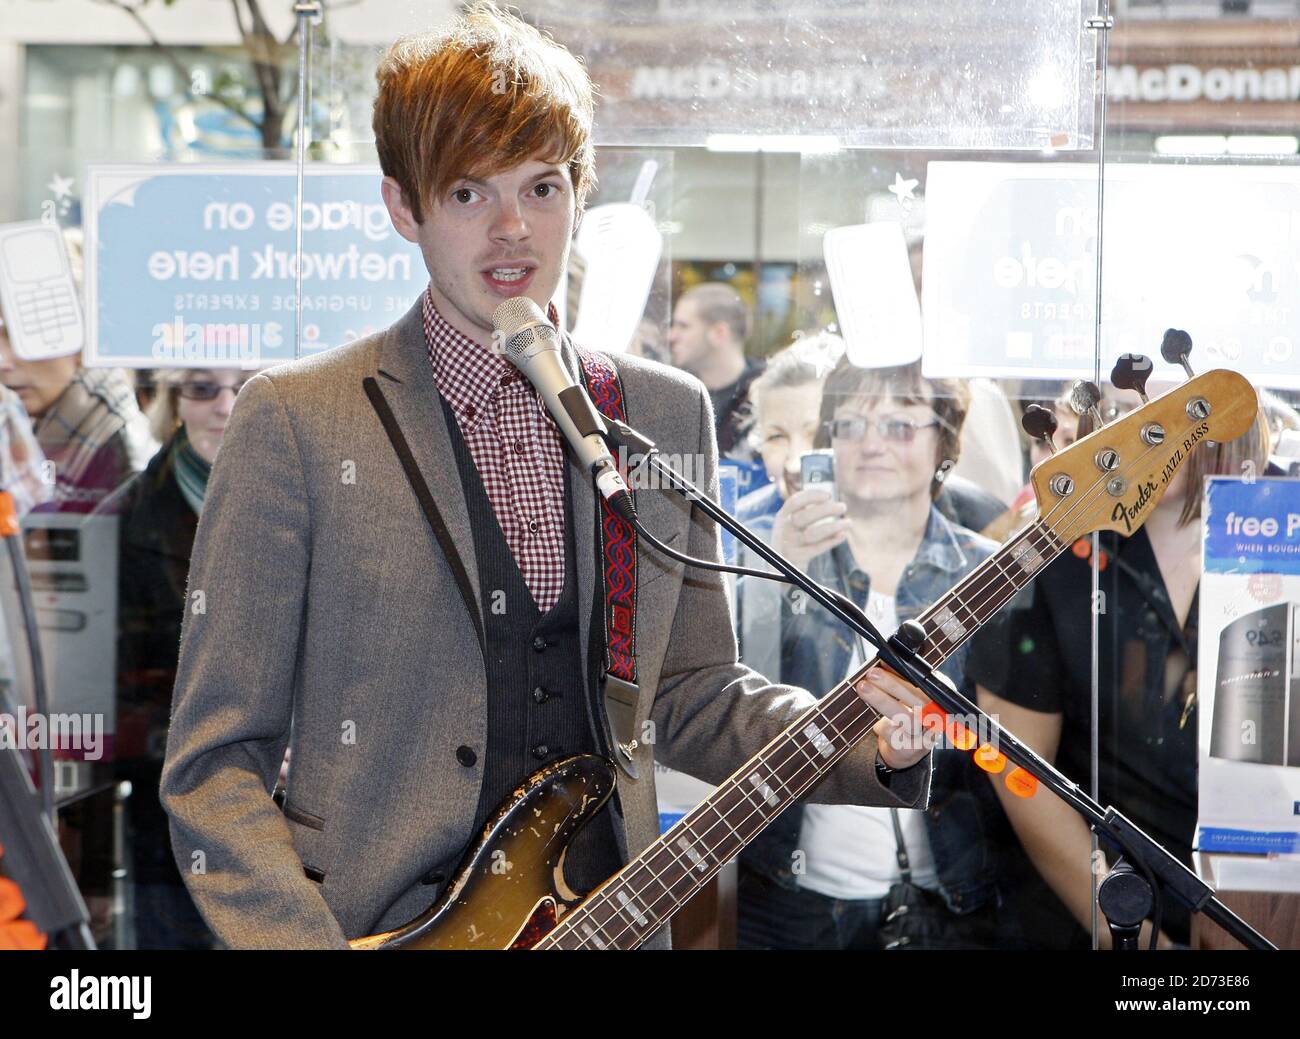 Richard Jones of The Feeling performs live at the Carphone Warehouse on Oxford St in London, for the launch of the new Nokia Comes With Music service. Stock Photo